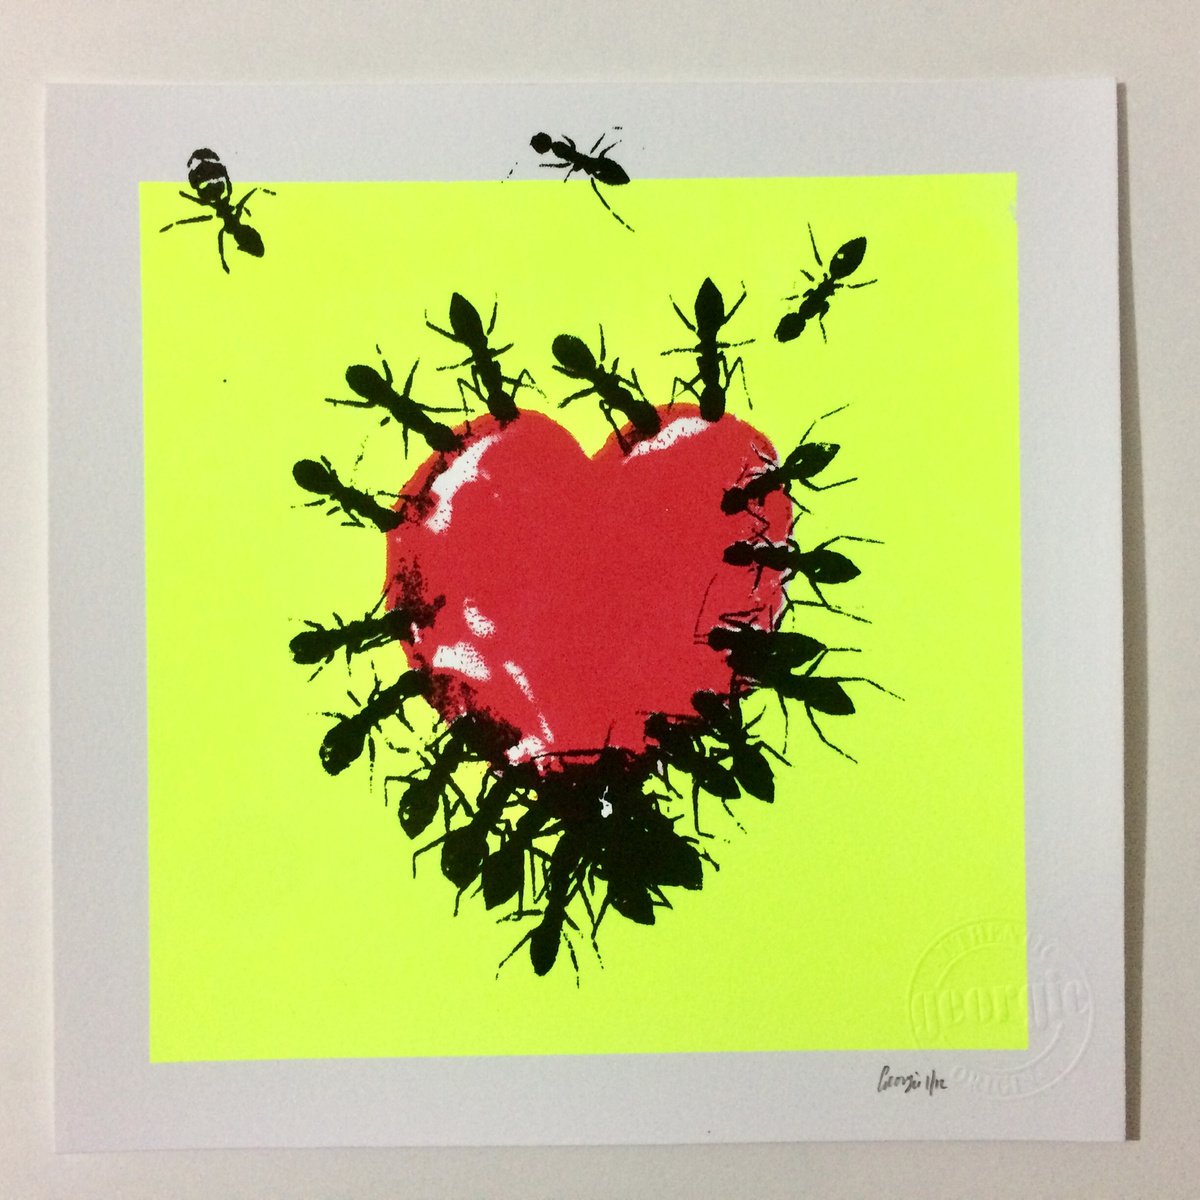 Feed me love. Fluorescent yellow. by Georgie